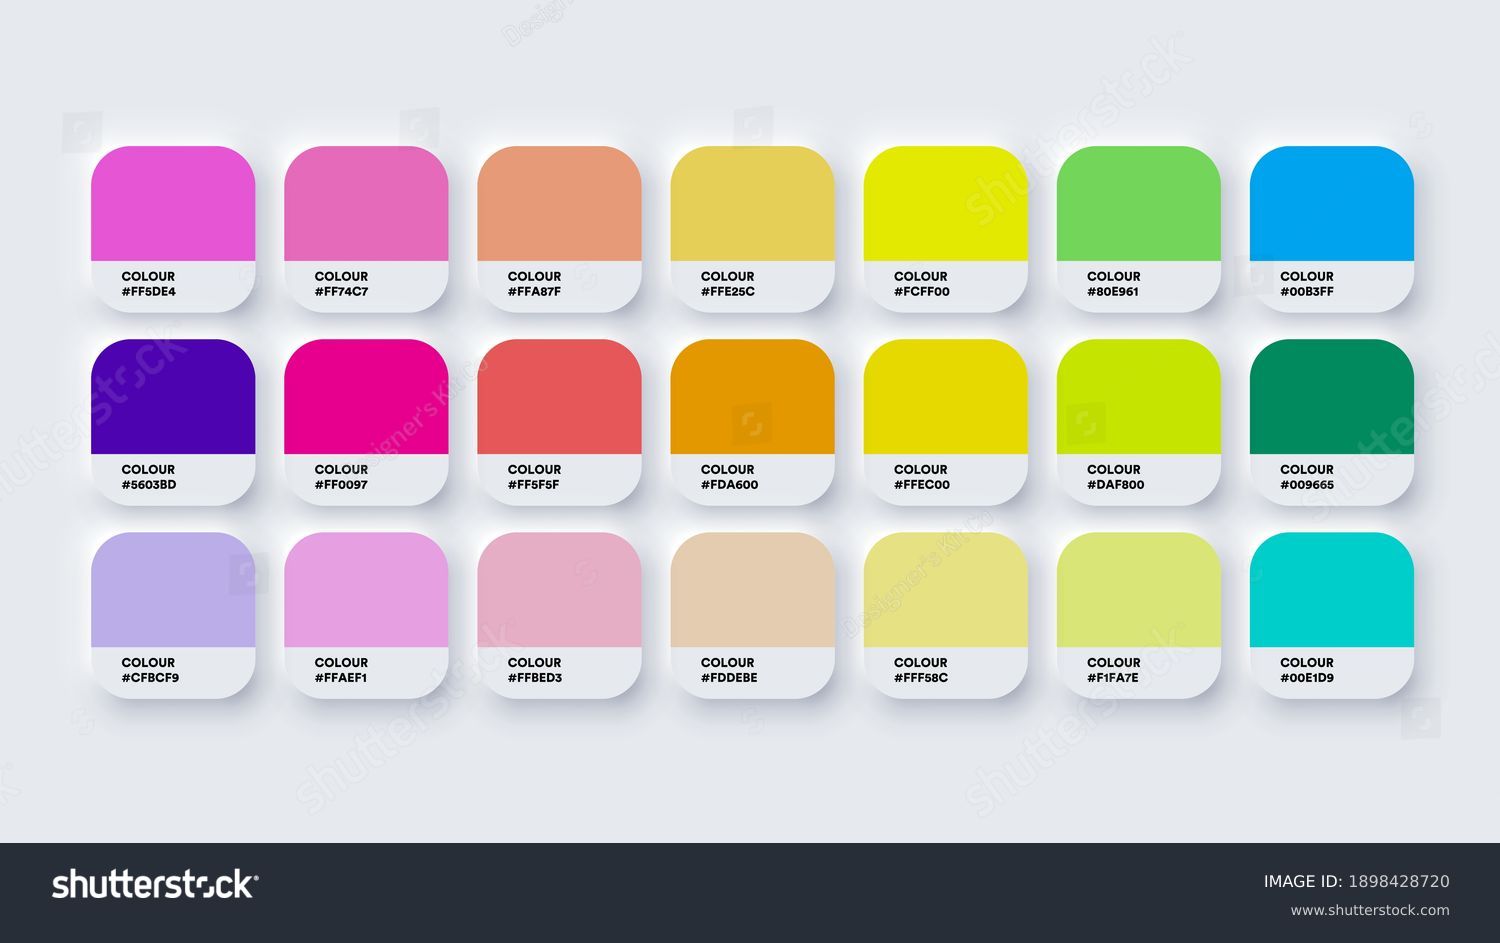 SVG of Colour Guide Palette Catalog Samples Pastel and Neon in RGB HEX. Neomorphism Vector svg